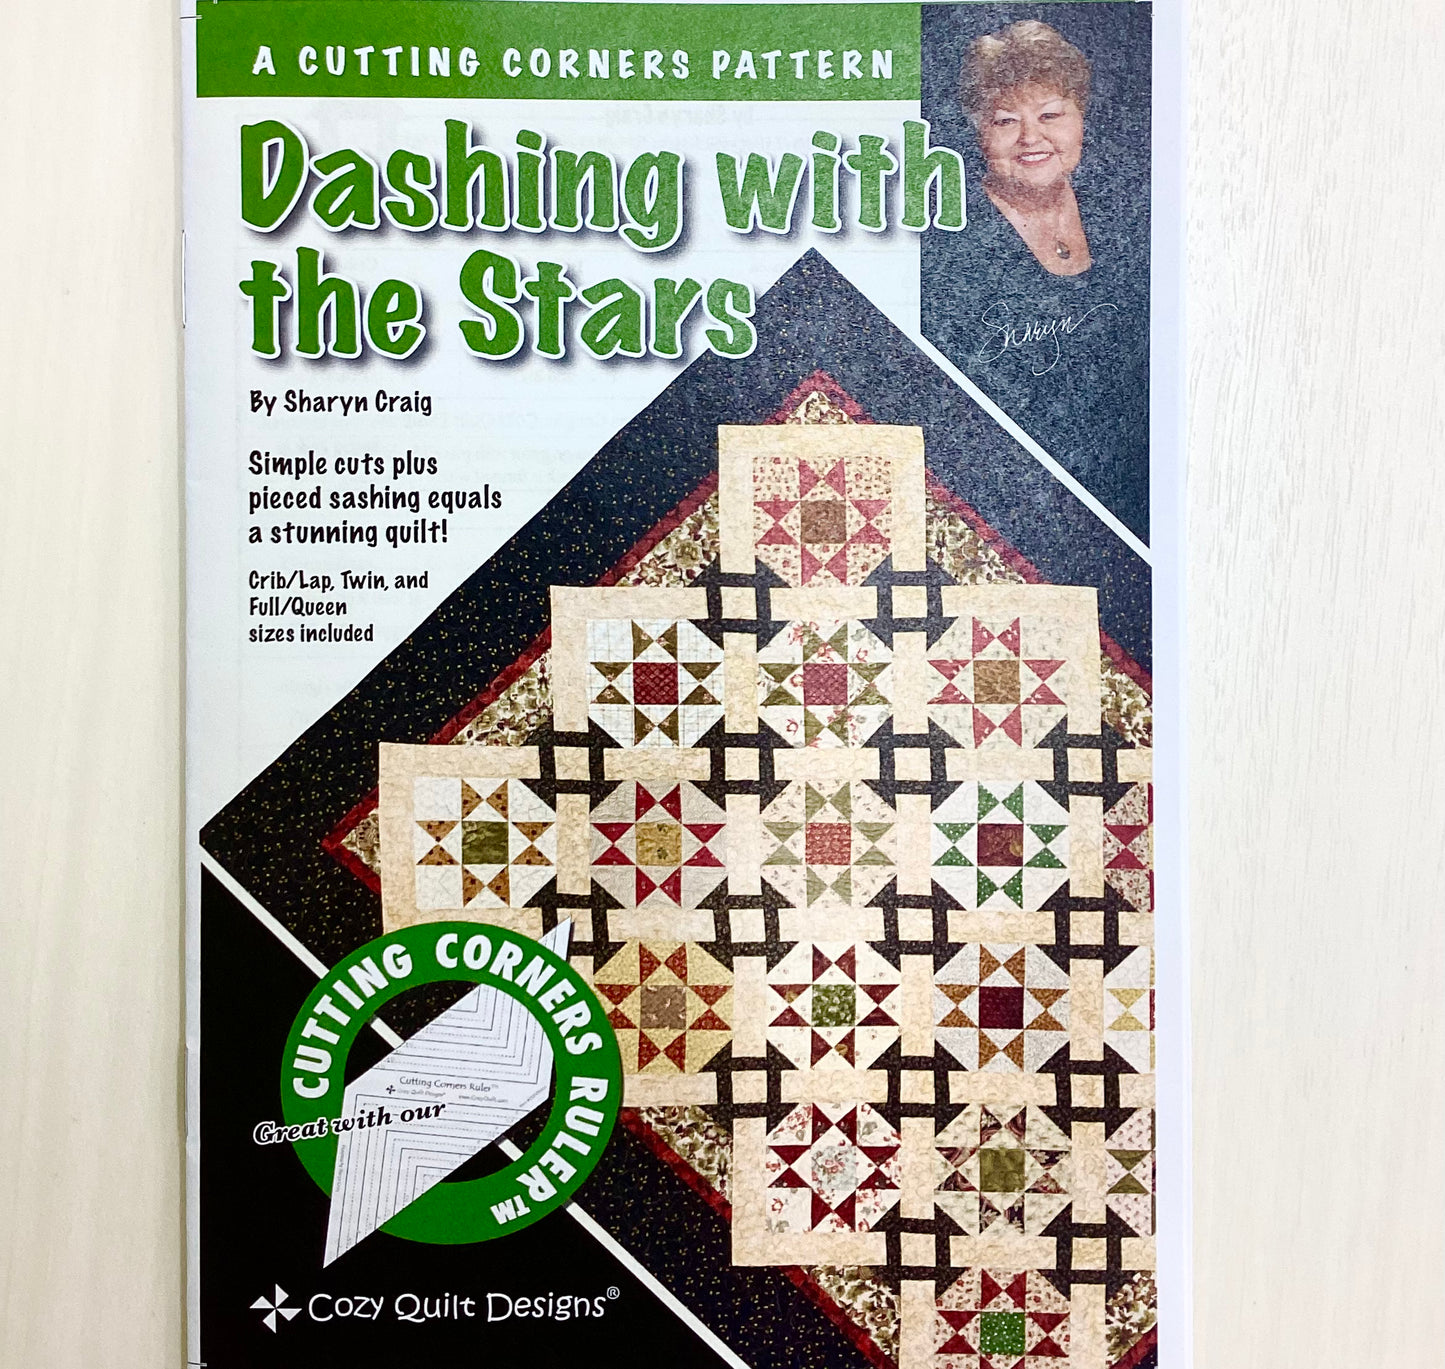 Pattern - Dashing with the stars